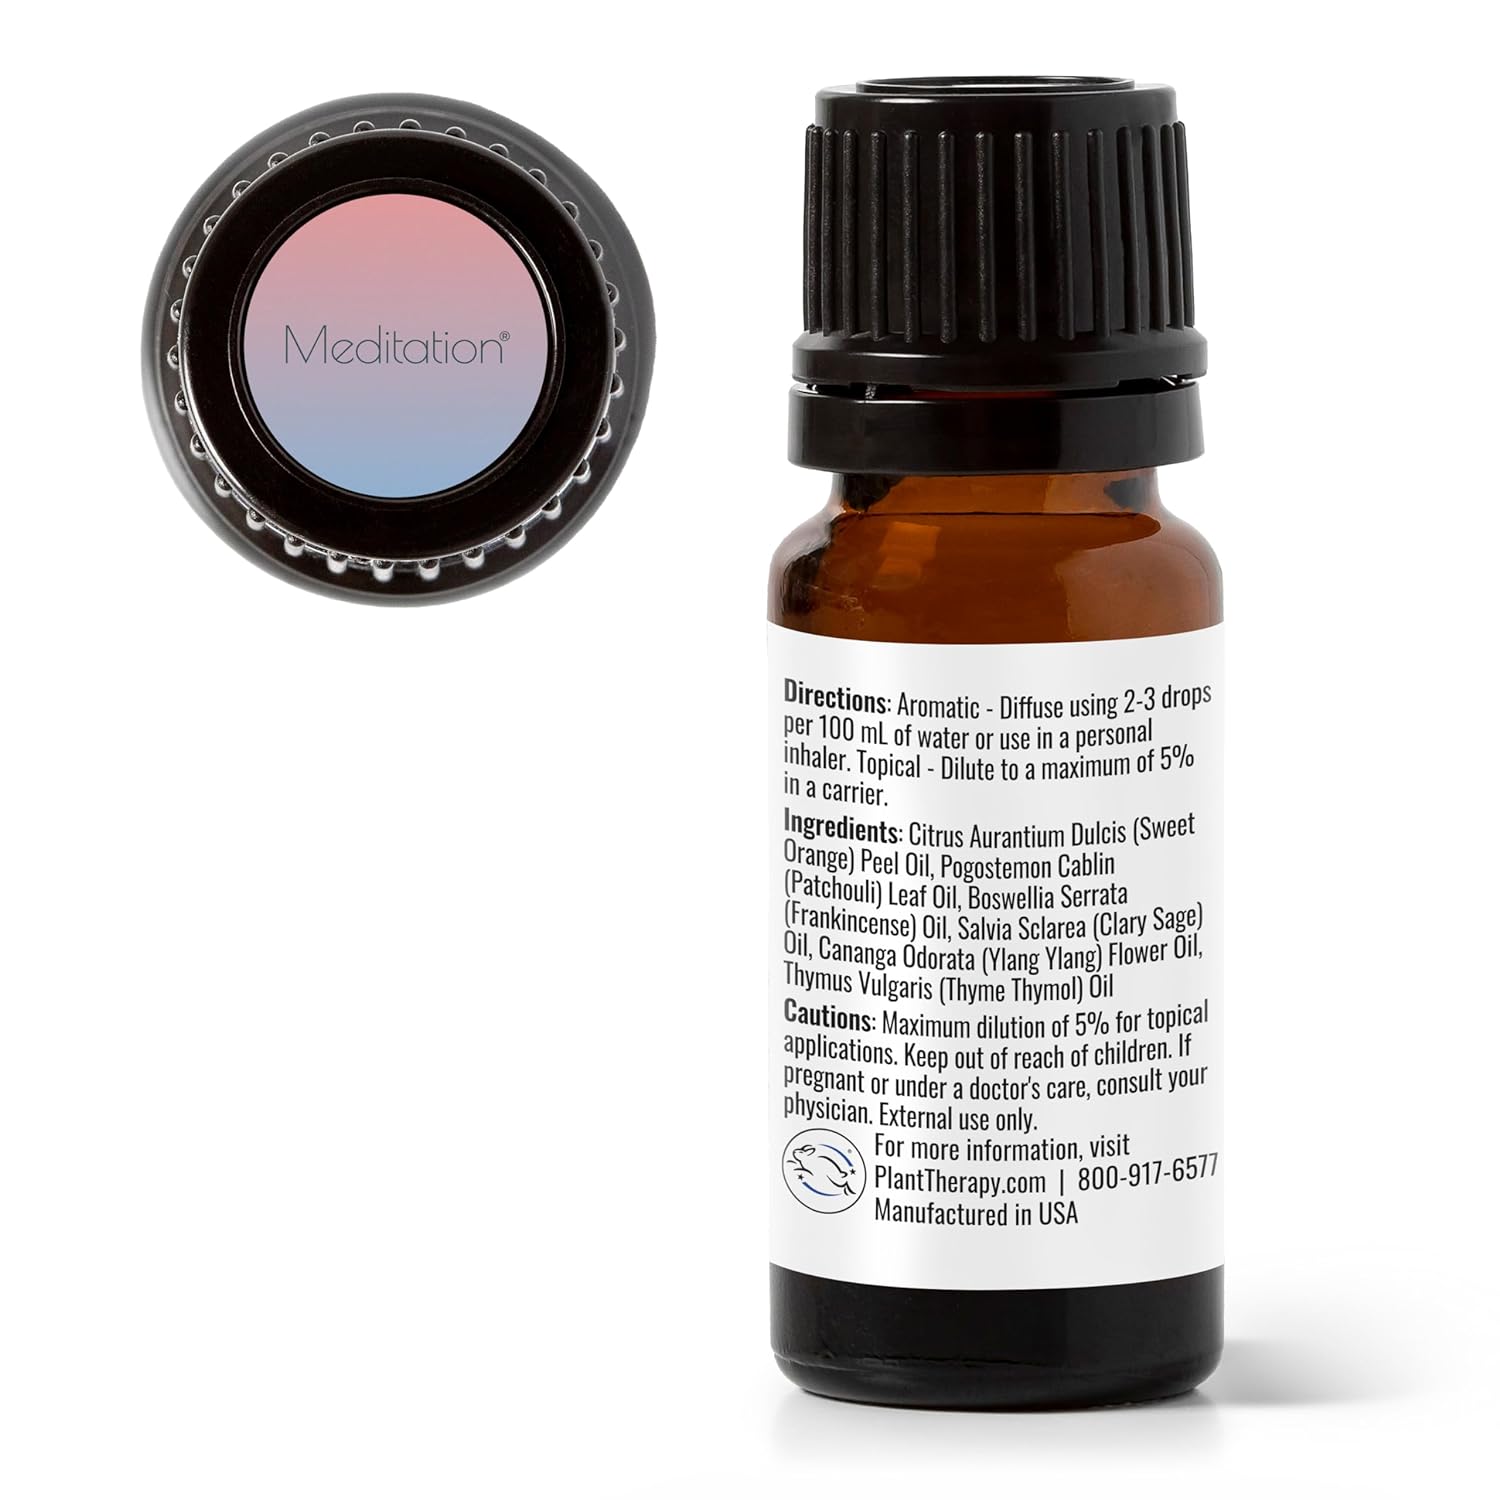 Plant Therapy Meditation Essential Oil Blend 10 mL (1/3 oz) 100% Pure, Undiluted, Therapeutic Grade : Health & Household